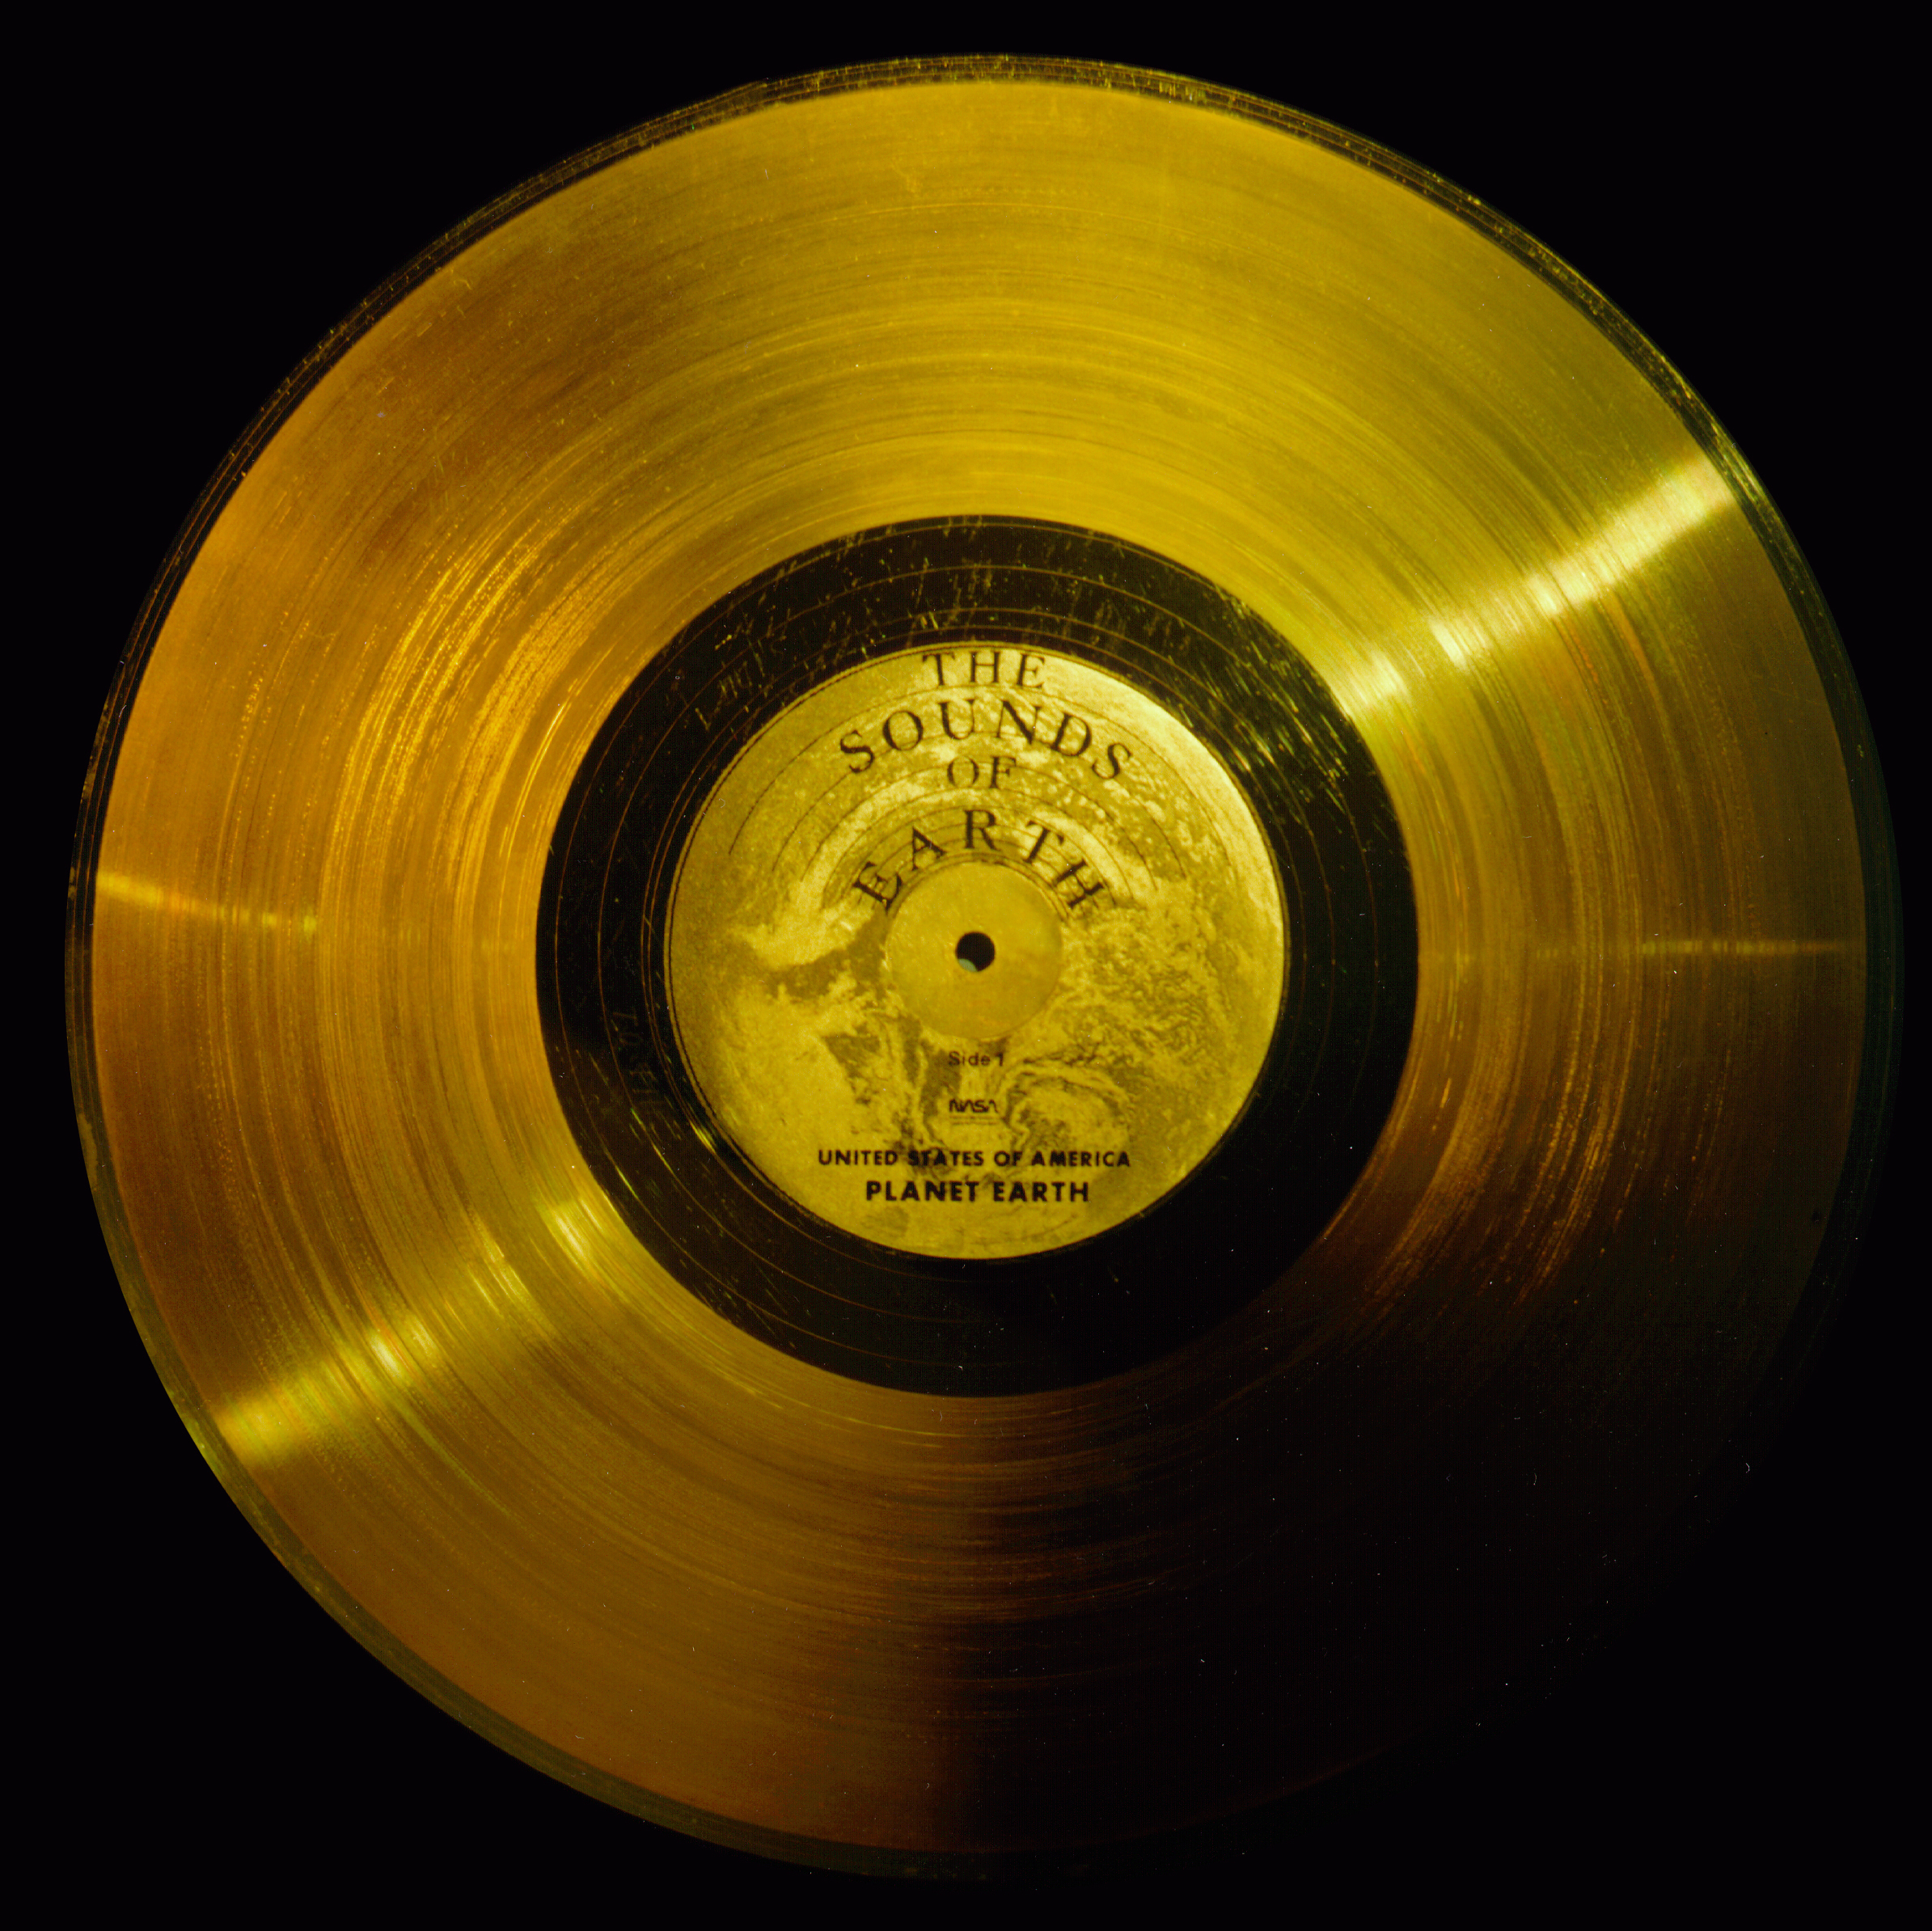 The front side of the Sounds of Earth golden vinyl record